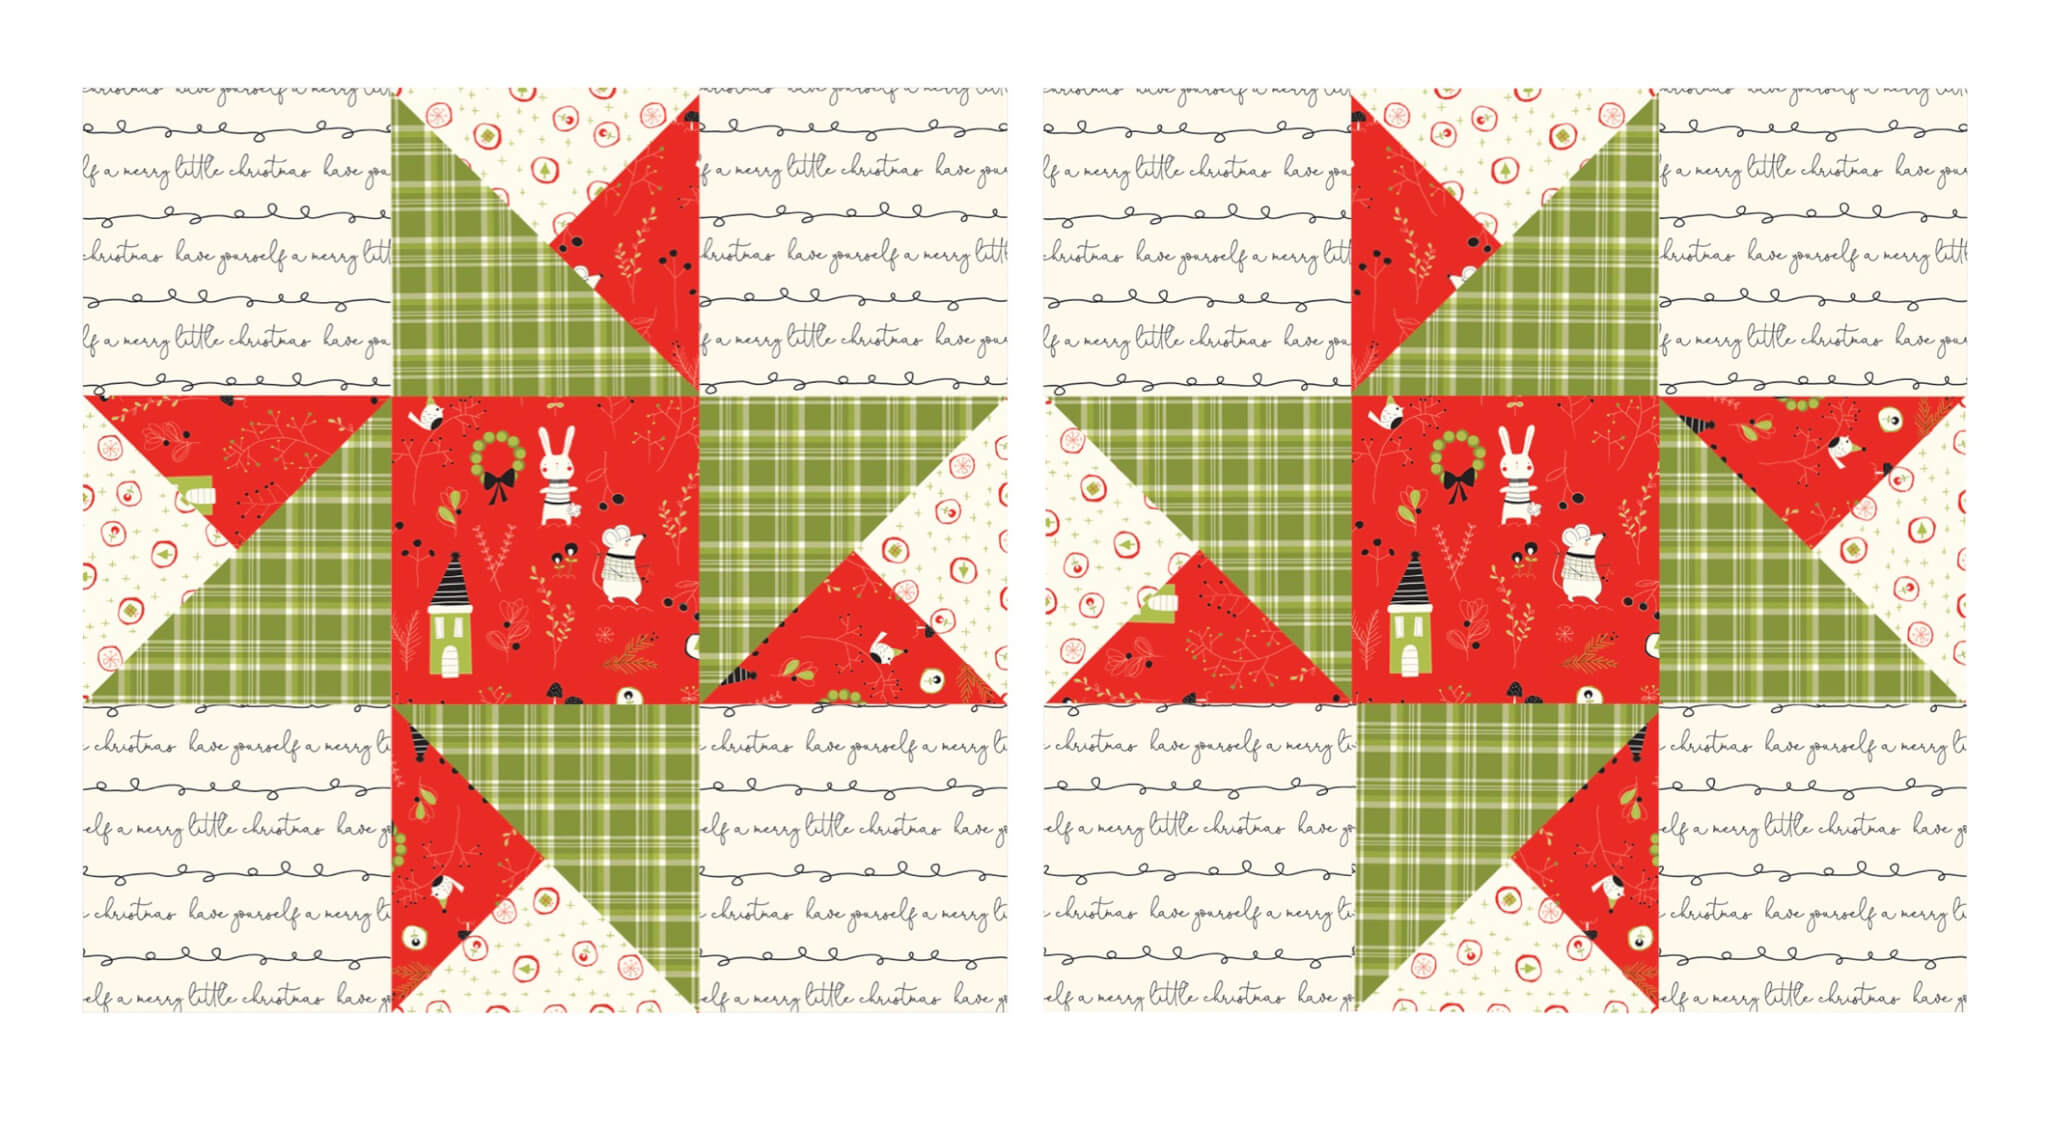 June 2021 NZP Block of the Month: Star of Hope at the Nancy Zieman Productions Blog